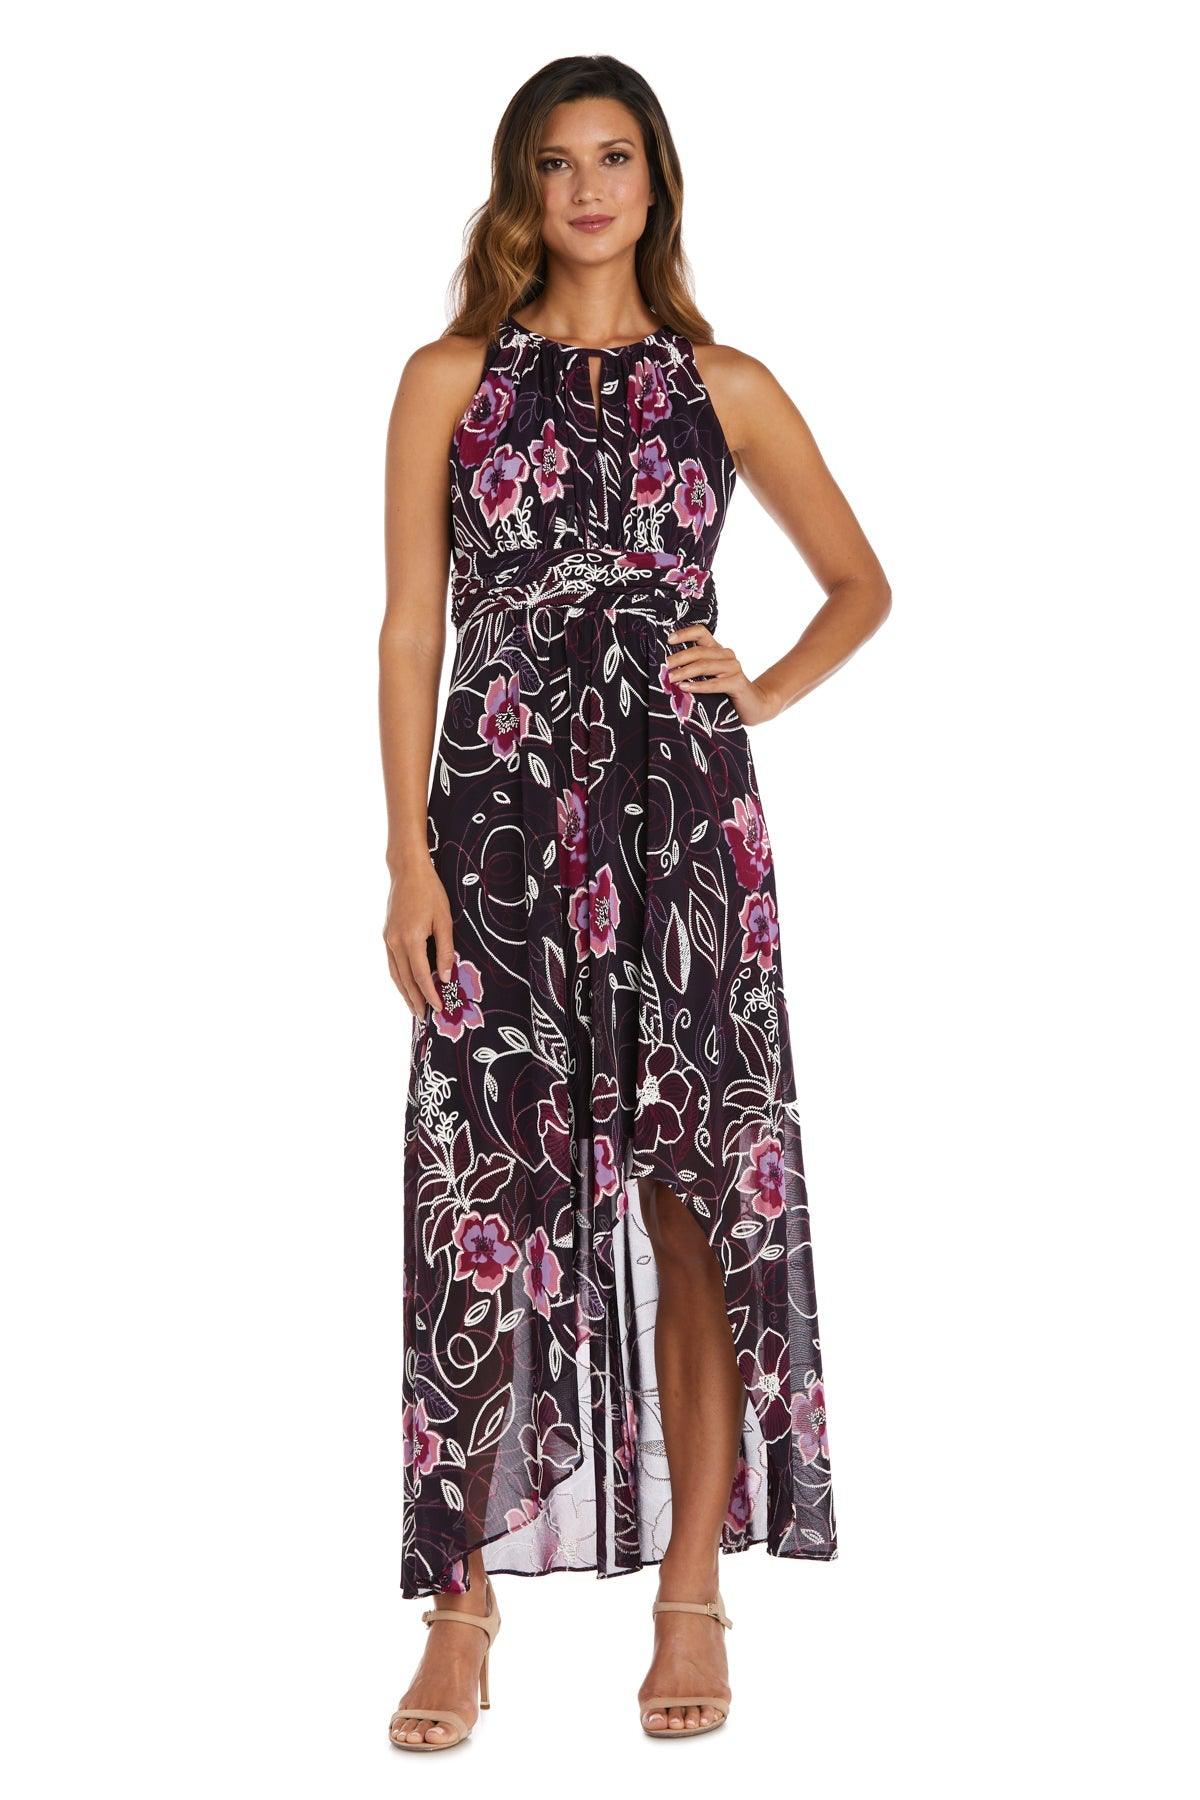 R&M Richards High Low Formal Petite Print Gown 7958P - The Dress Outlet